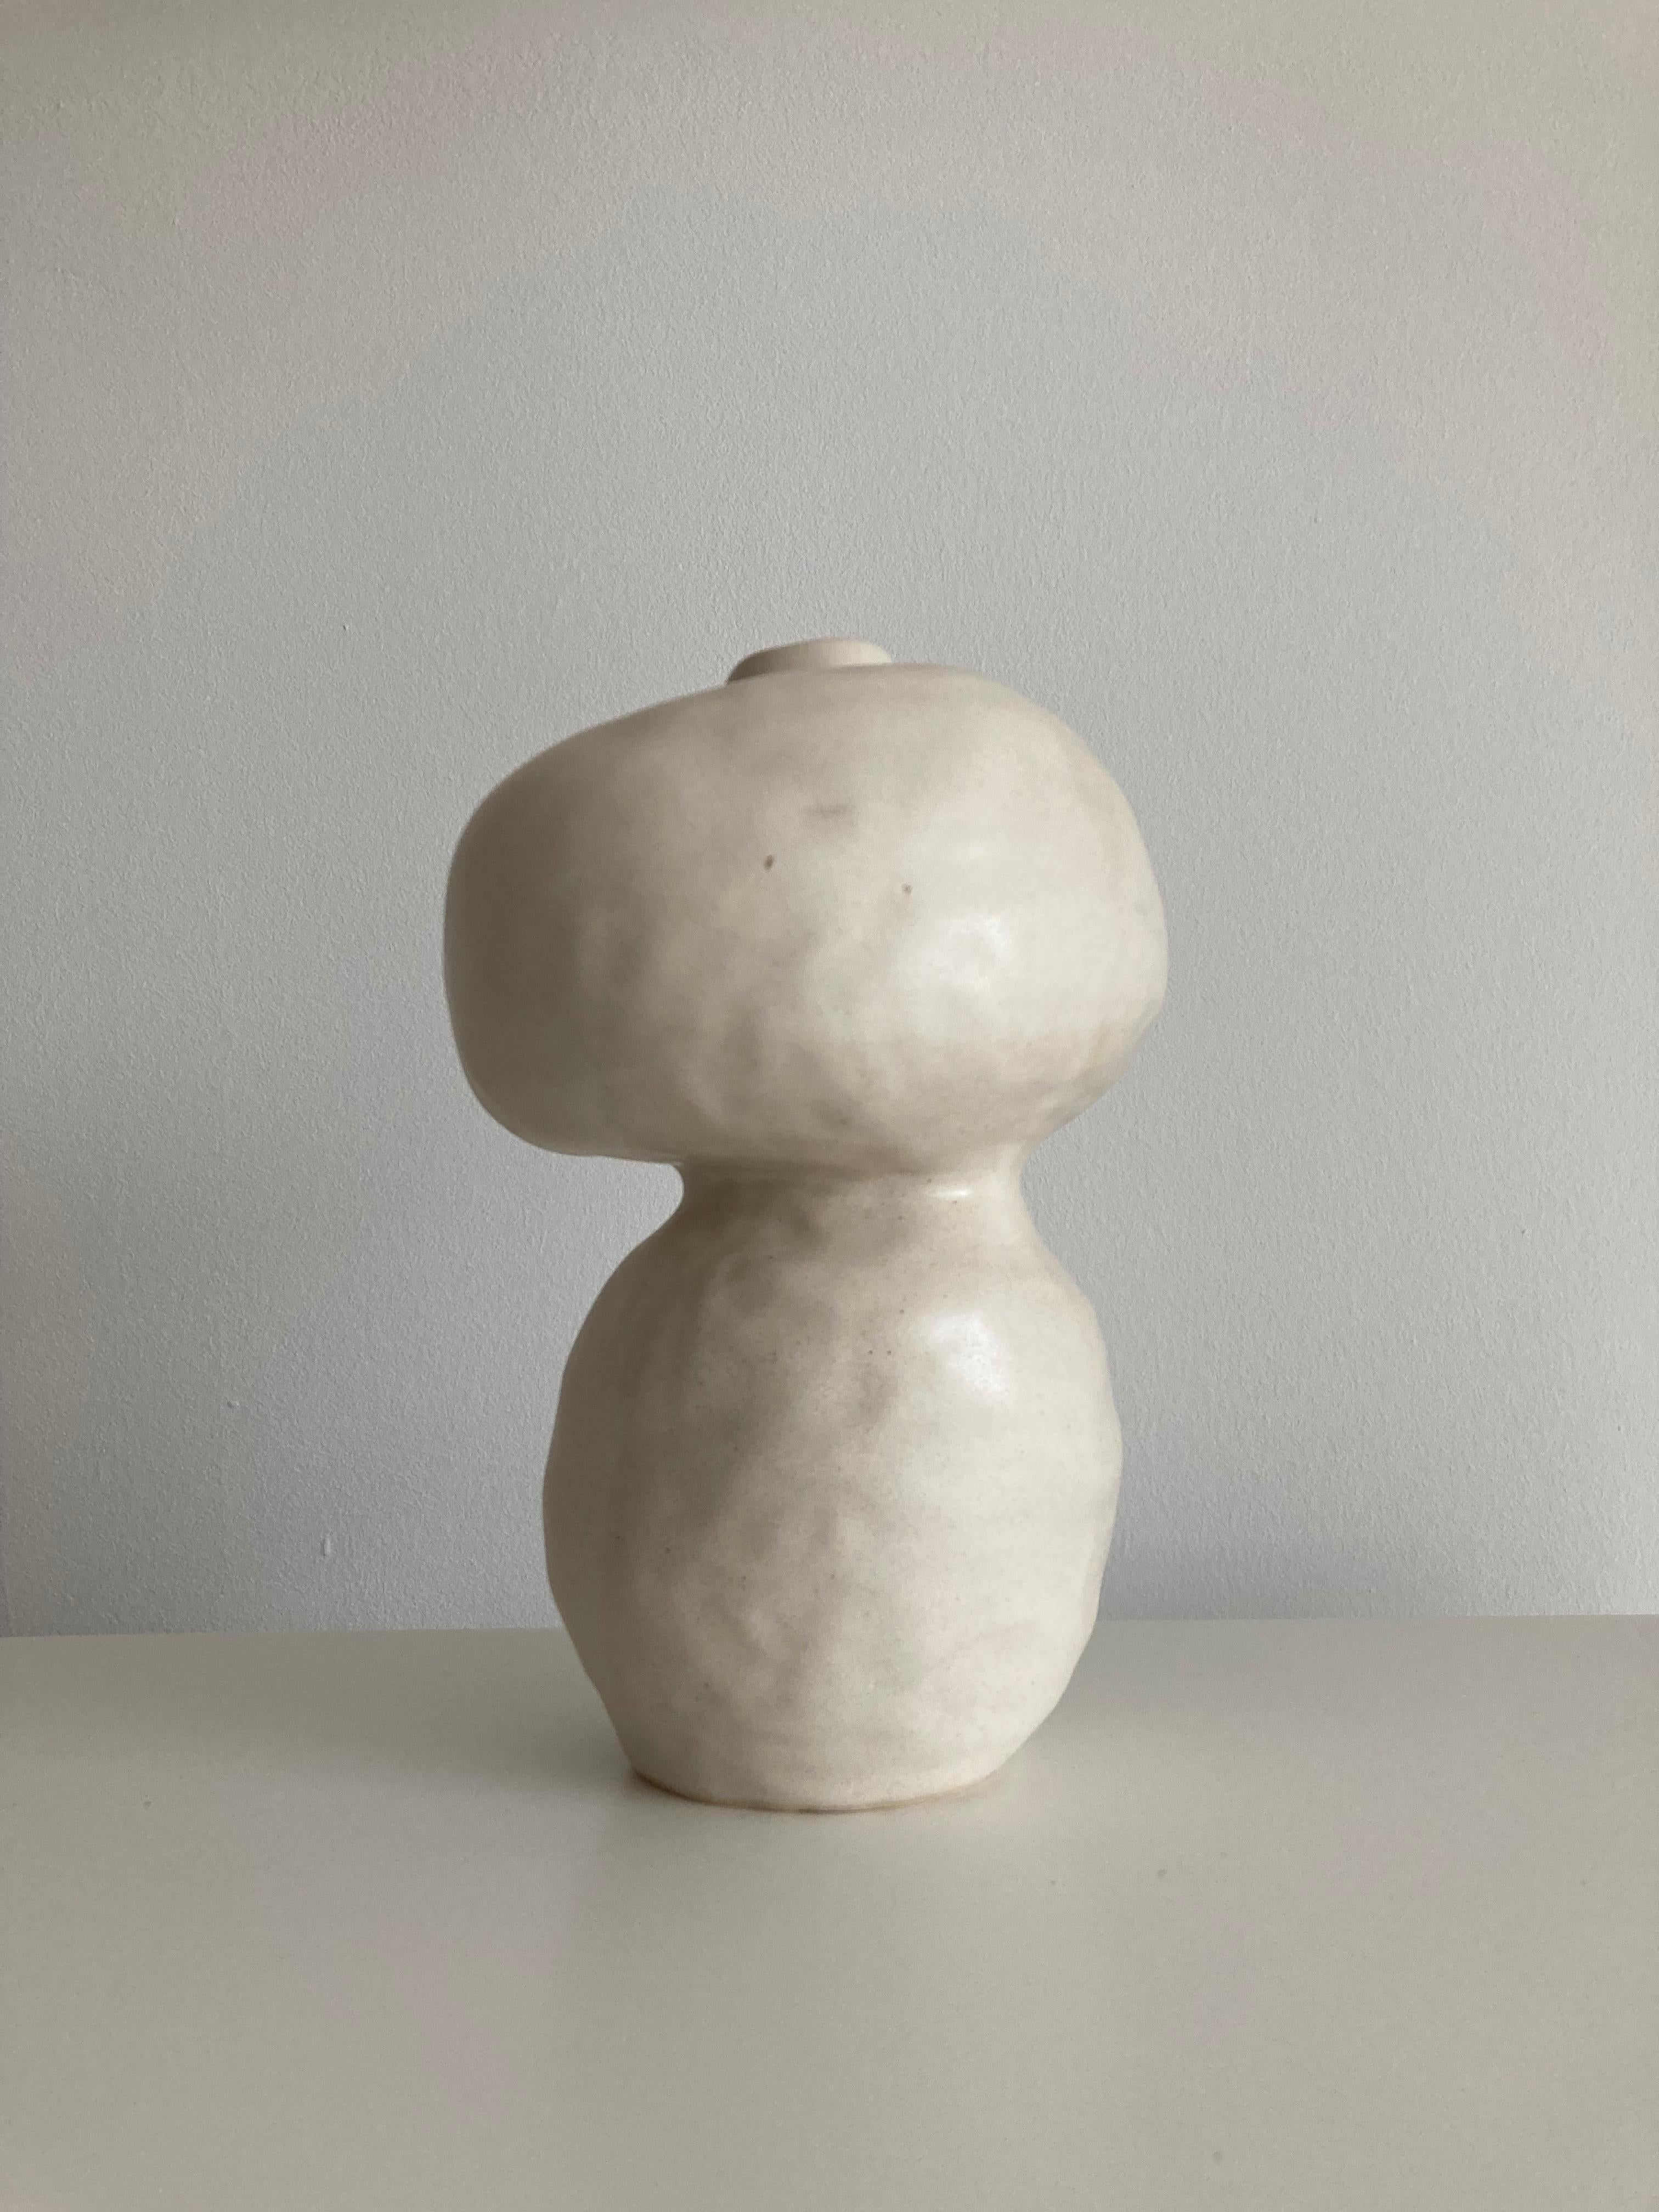 No.98 stoneware sculpture, Tonfisk by Ciona Lee 
One of a Kind
Dimensions: Ø 13 x H 19 cm
Materials: White stoneware, satin cream glaze
Variations of size and colour available

Tonfisk is the ceramic practice by Ciona Lee, a Korean-Italian